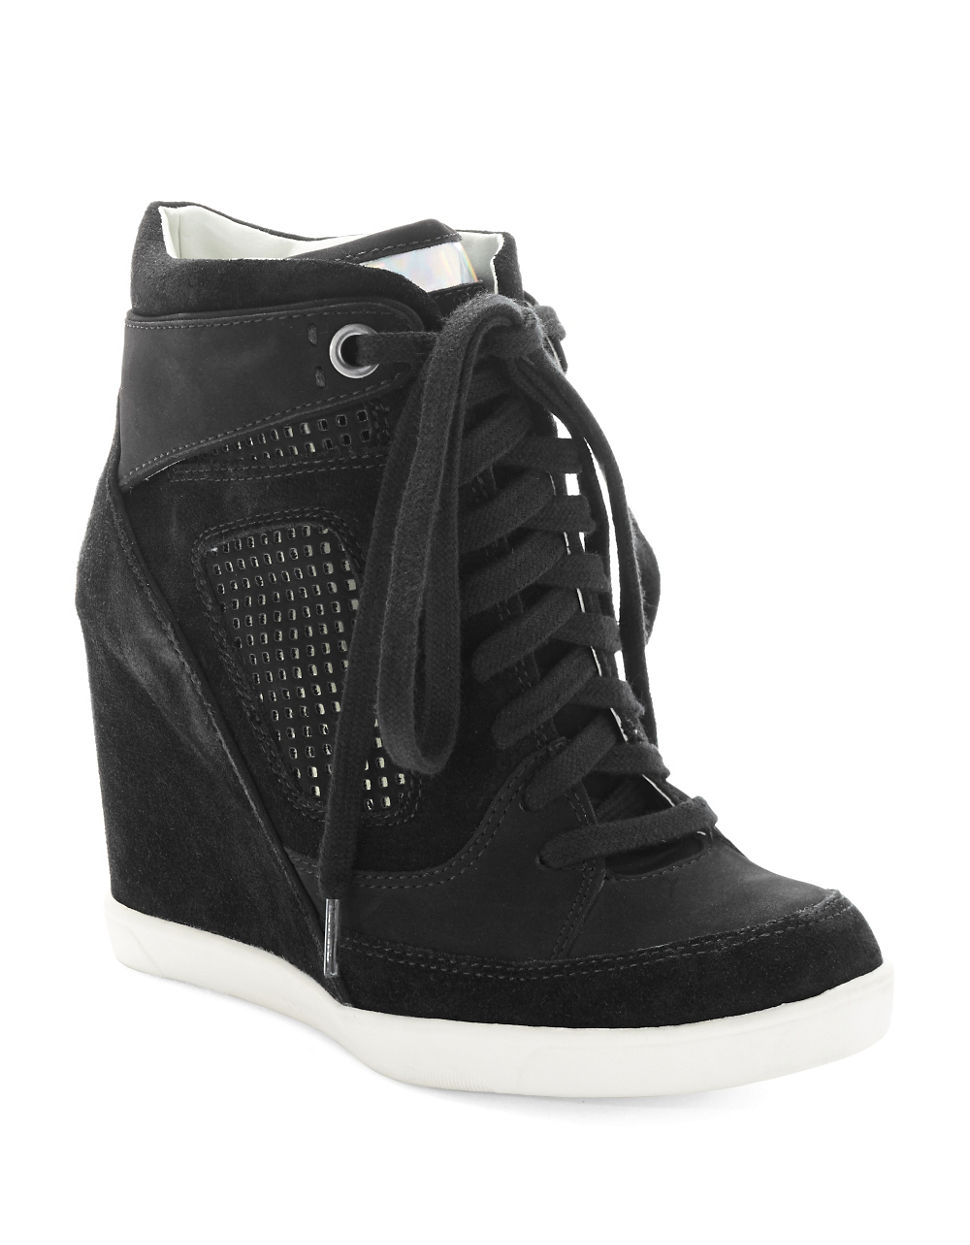 French Connection Marla Wedge Sneakers in Black | Lyst